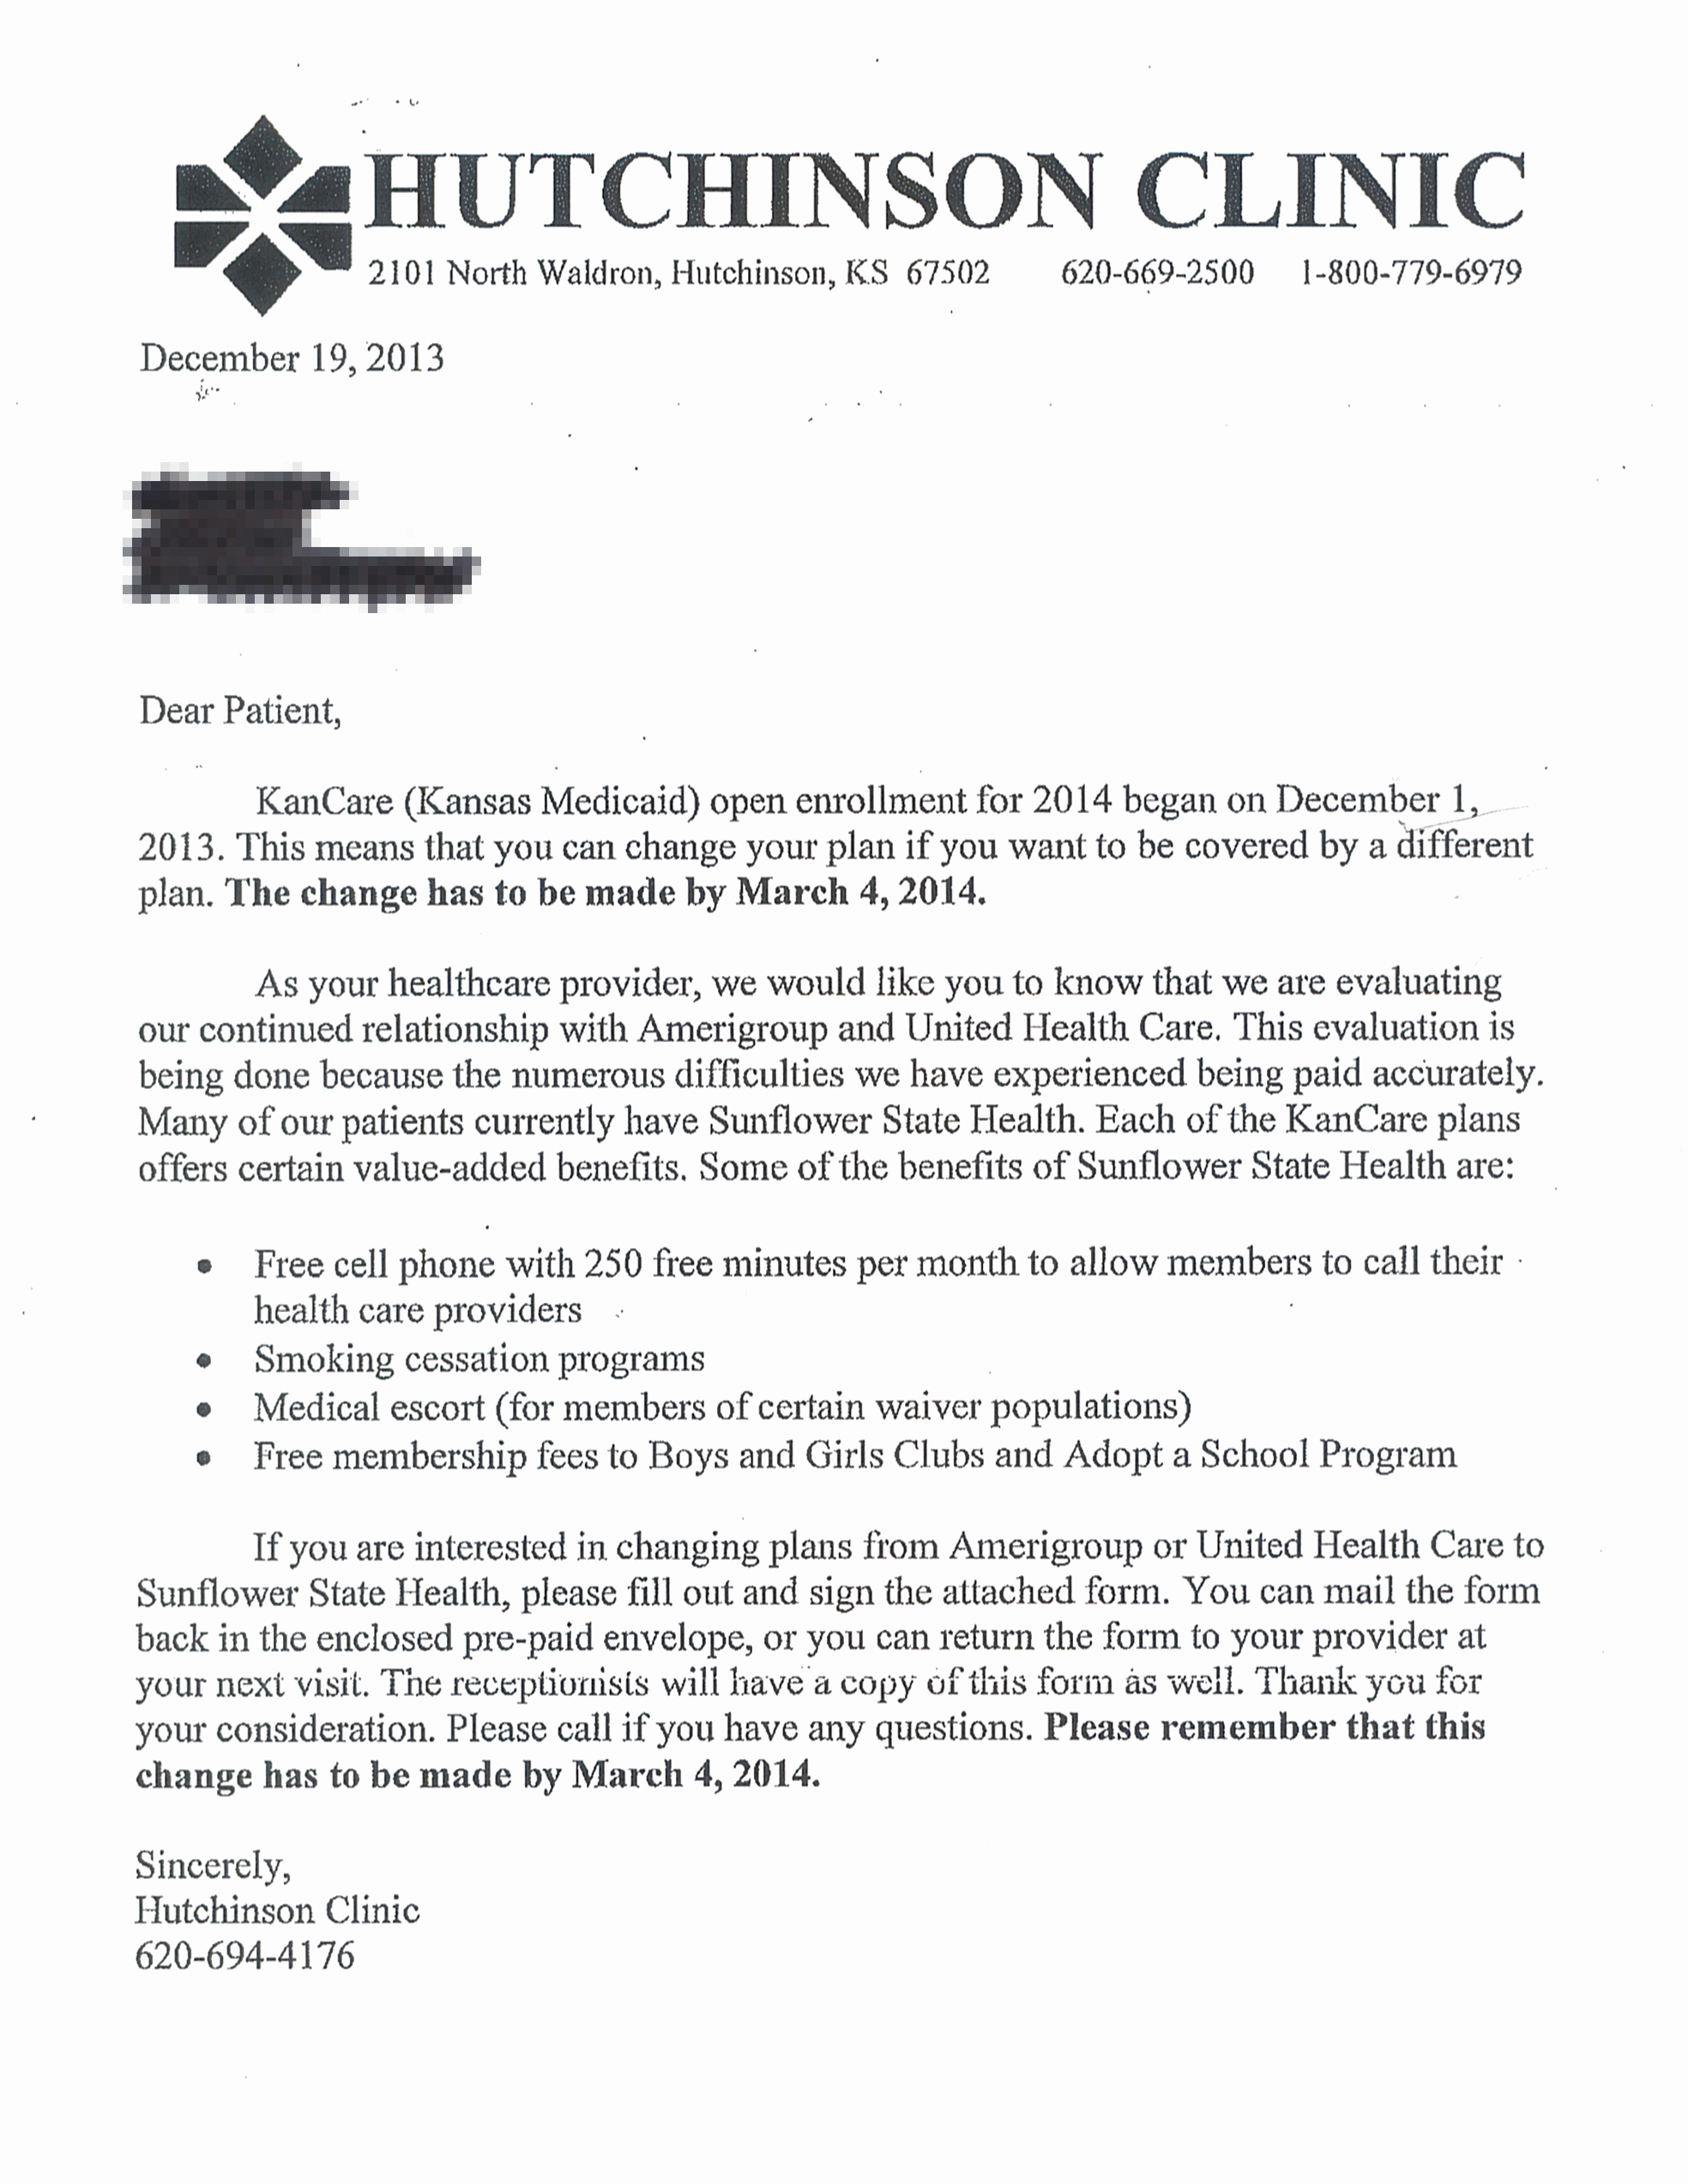 Sample Open Enrollment Letter to Employees Luxury Hutchinson Clinic’s Letter Throws A Curve to Kancare Open